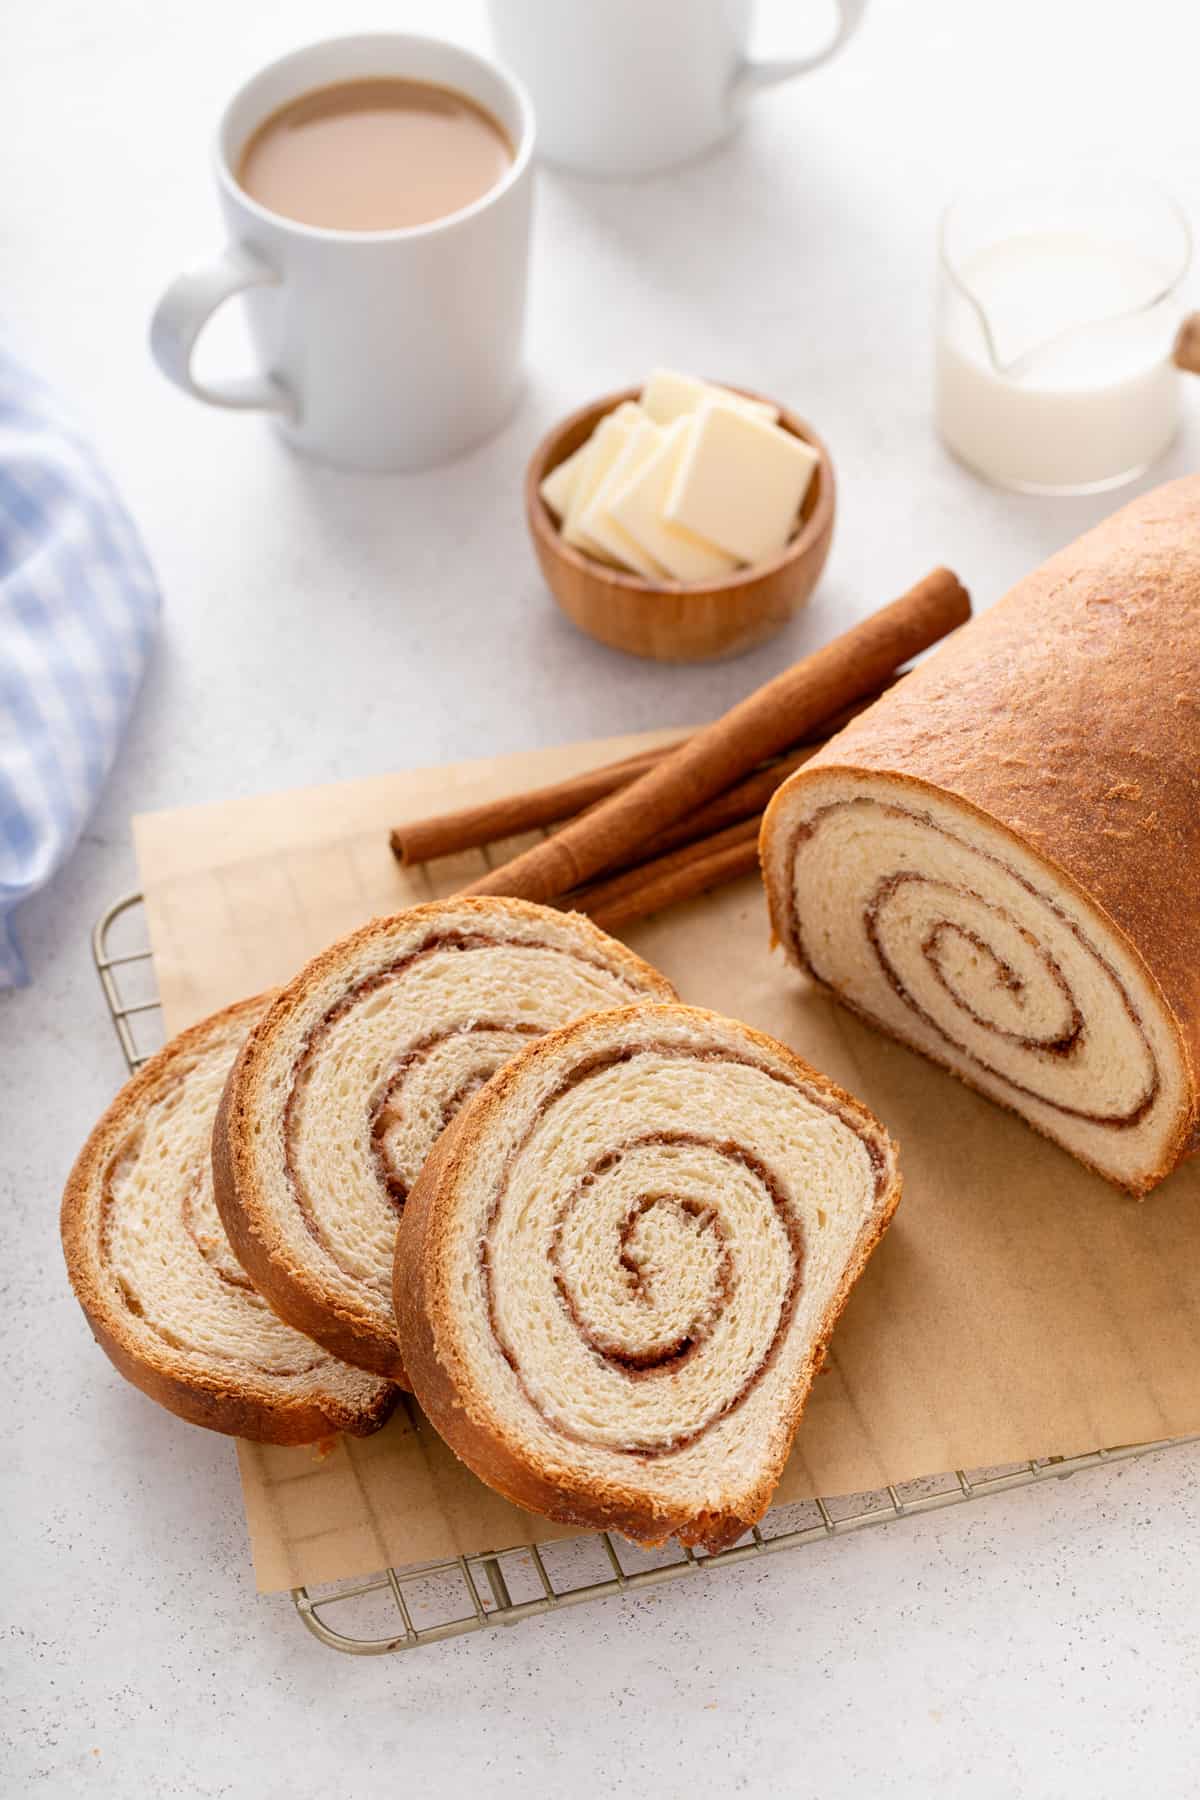 Three slices of cinnamon swirl bread on a piece of parchment paper next to the rest of the loaf.